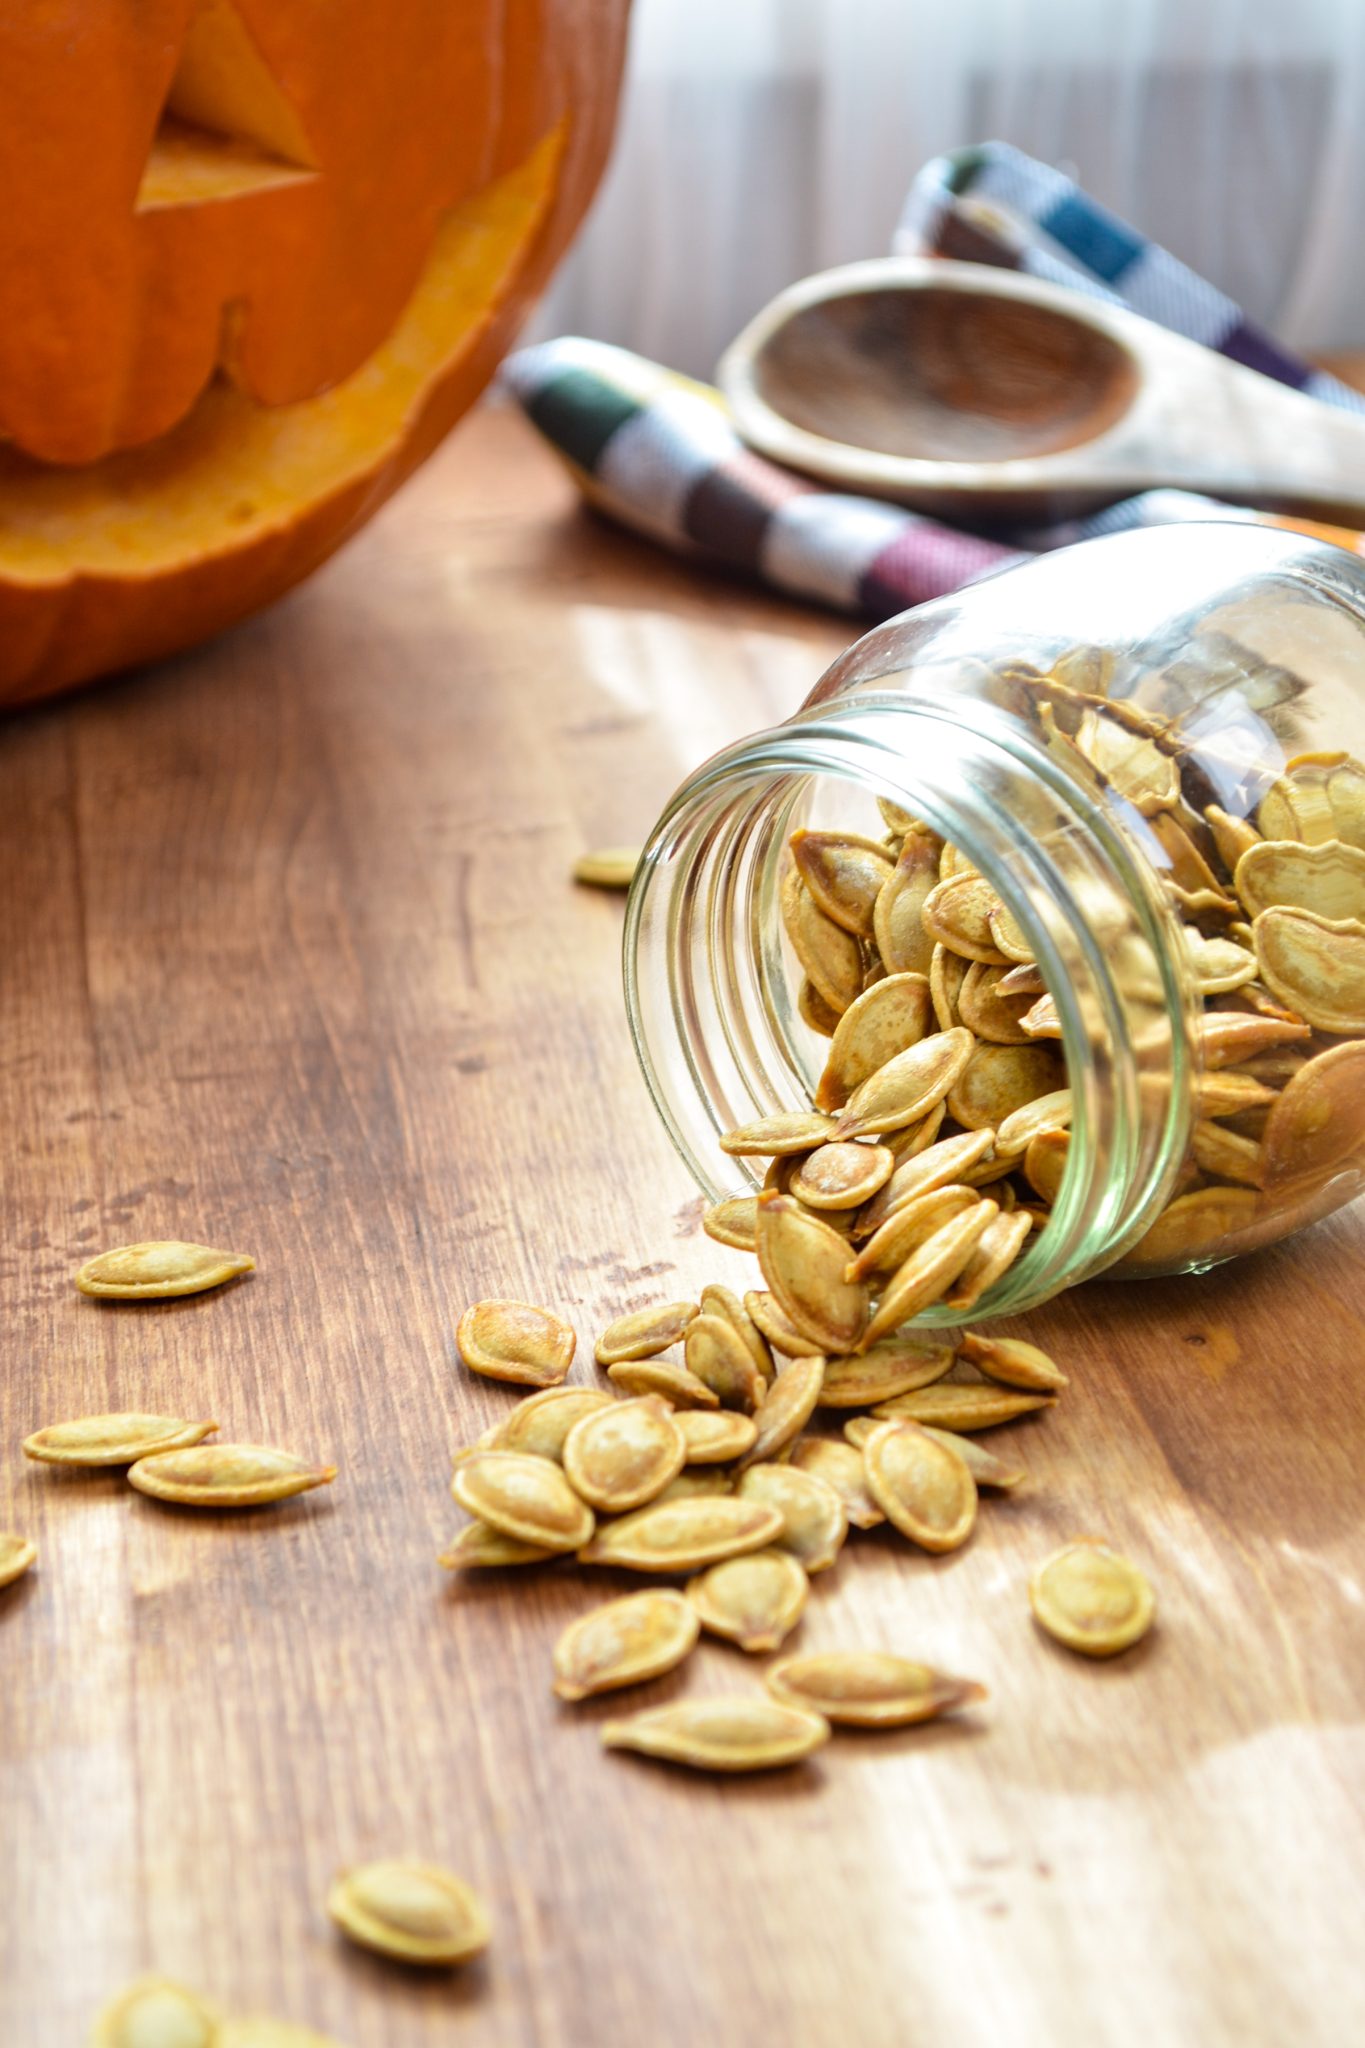 A jar of pumpkin seeds being spilled on the table, with a large pumpkin in the background.